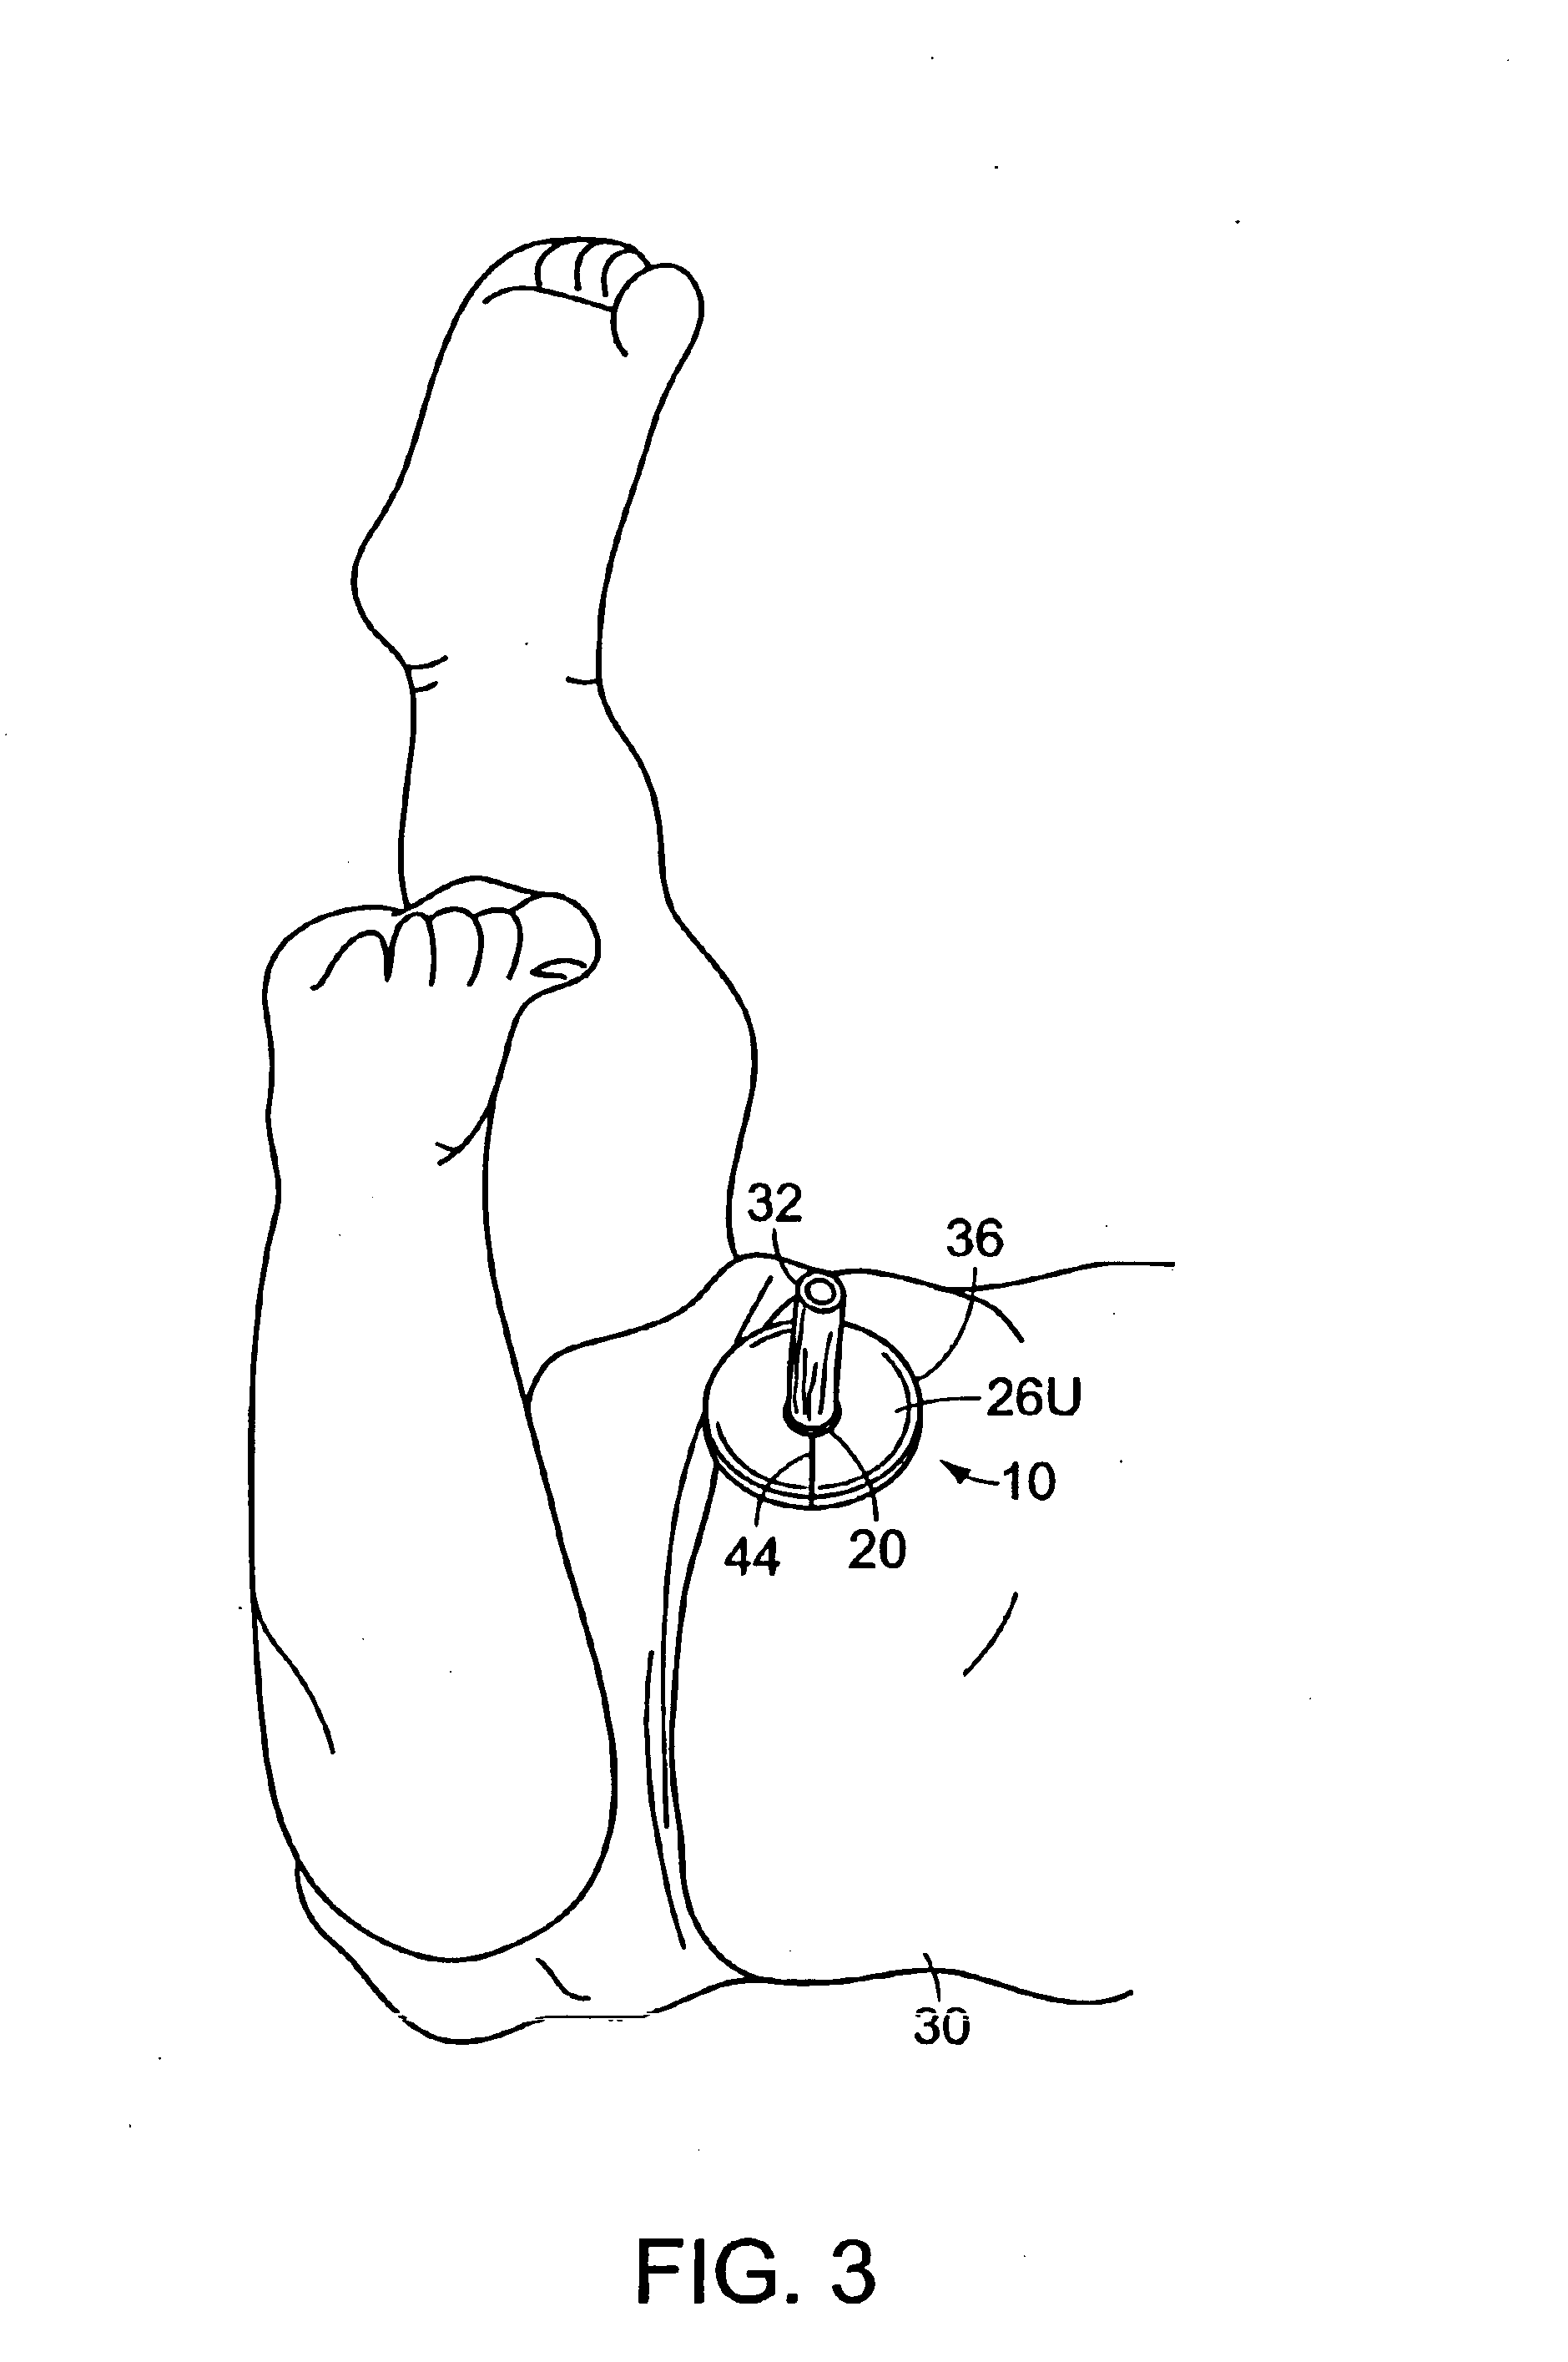 Bandage for protection of skin surrounding an umbilical cord stump